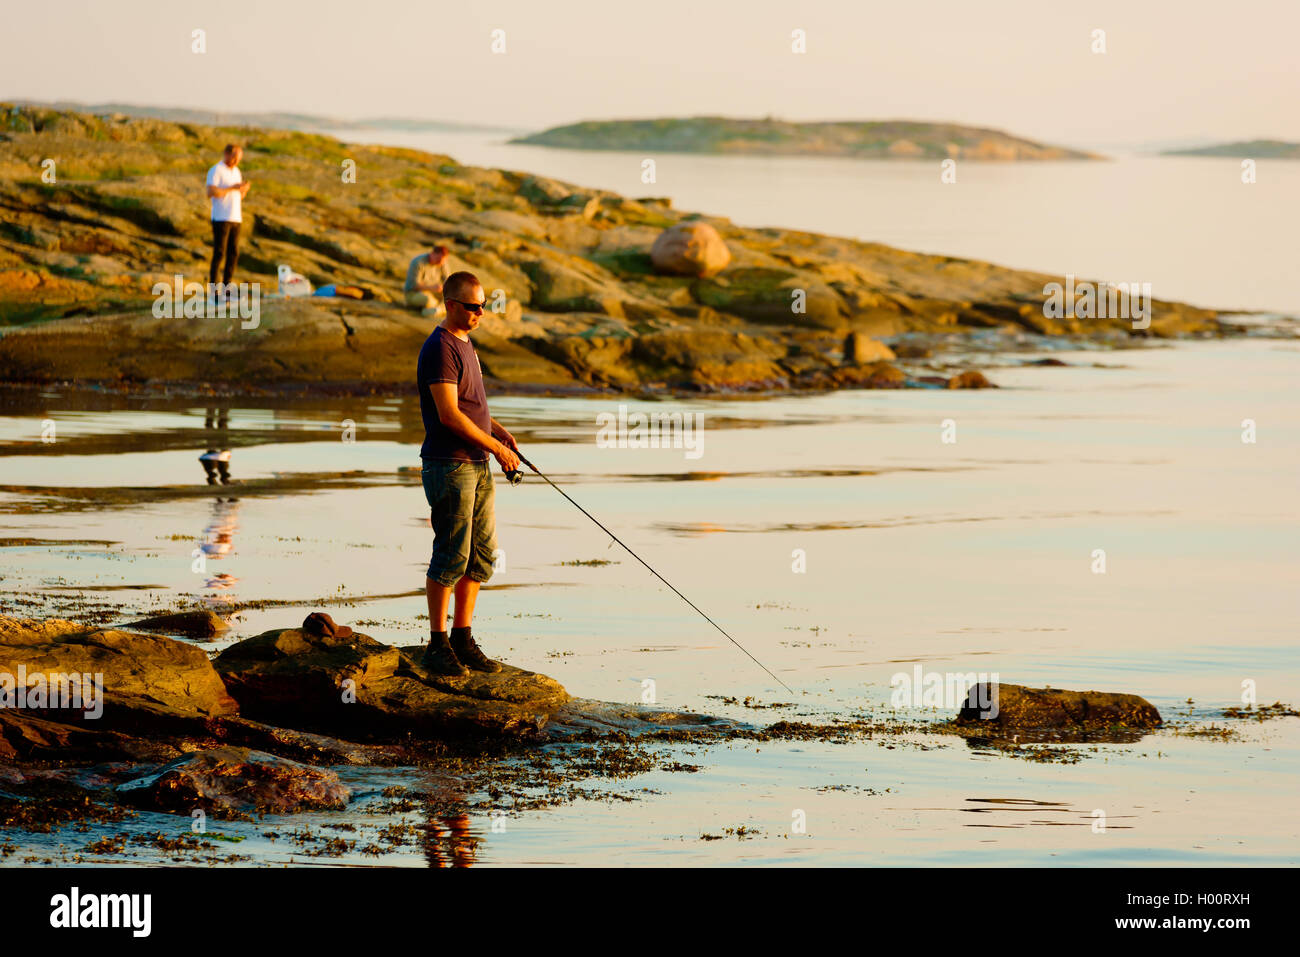 Marstrand, Sweden - September 8, 2016: Documentary of coastal recreational fishing in the evening sunlight. Water is calm and wi Stock Photo